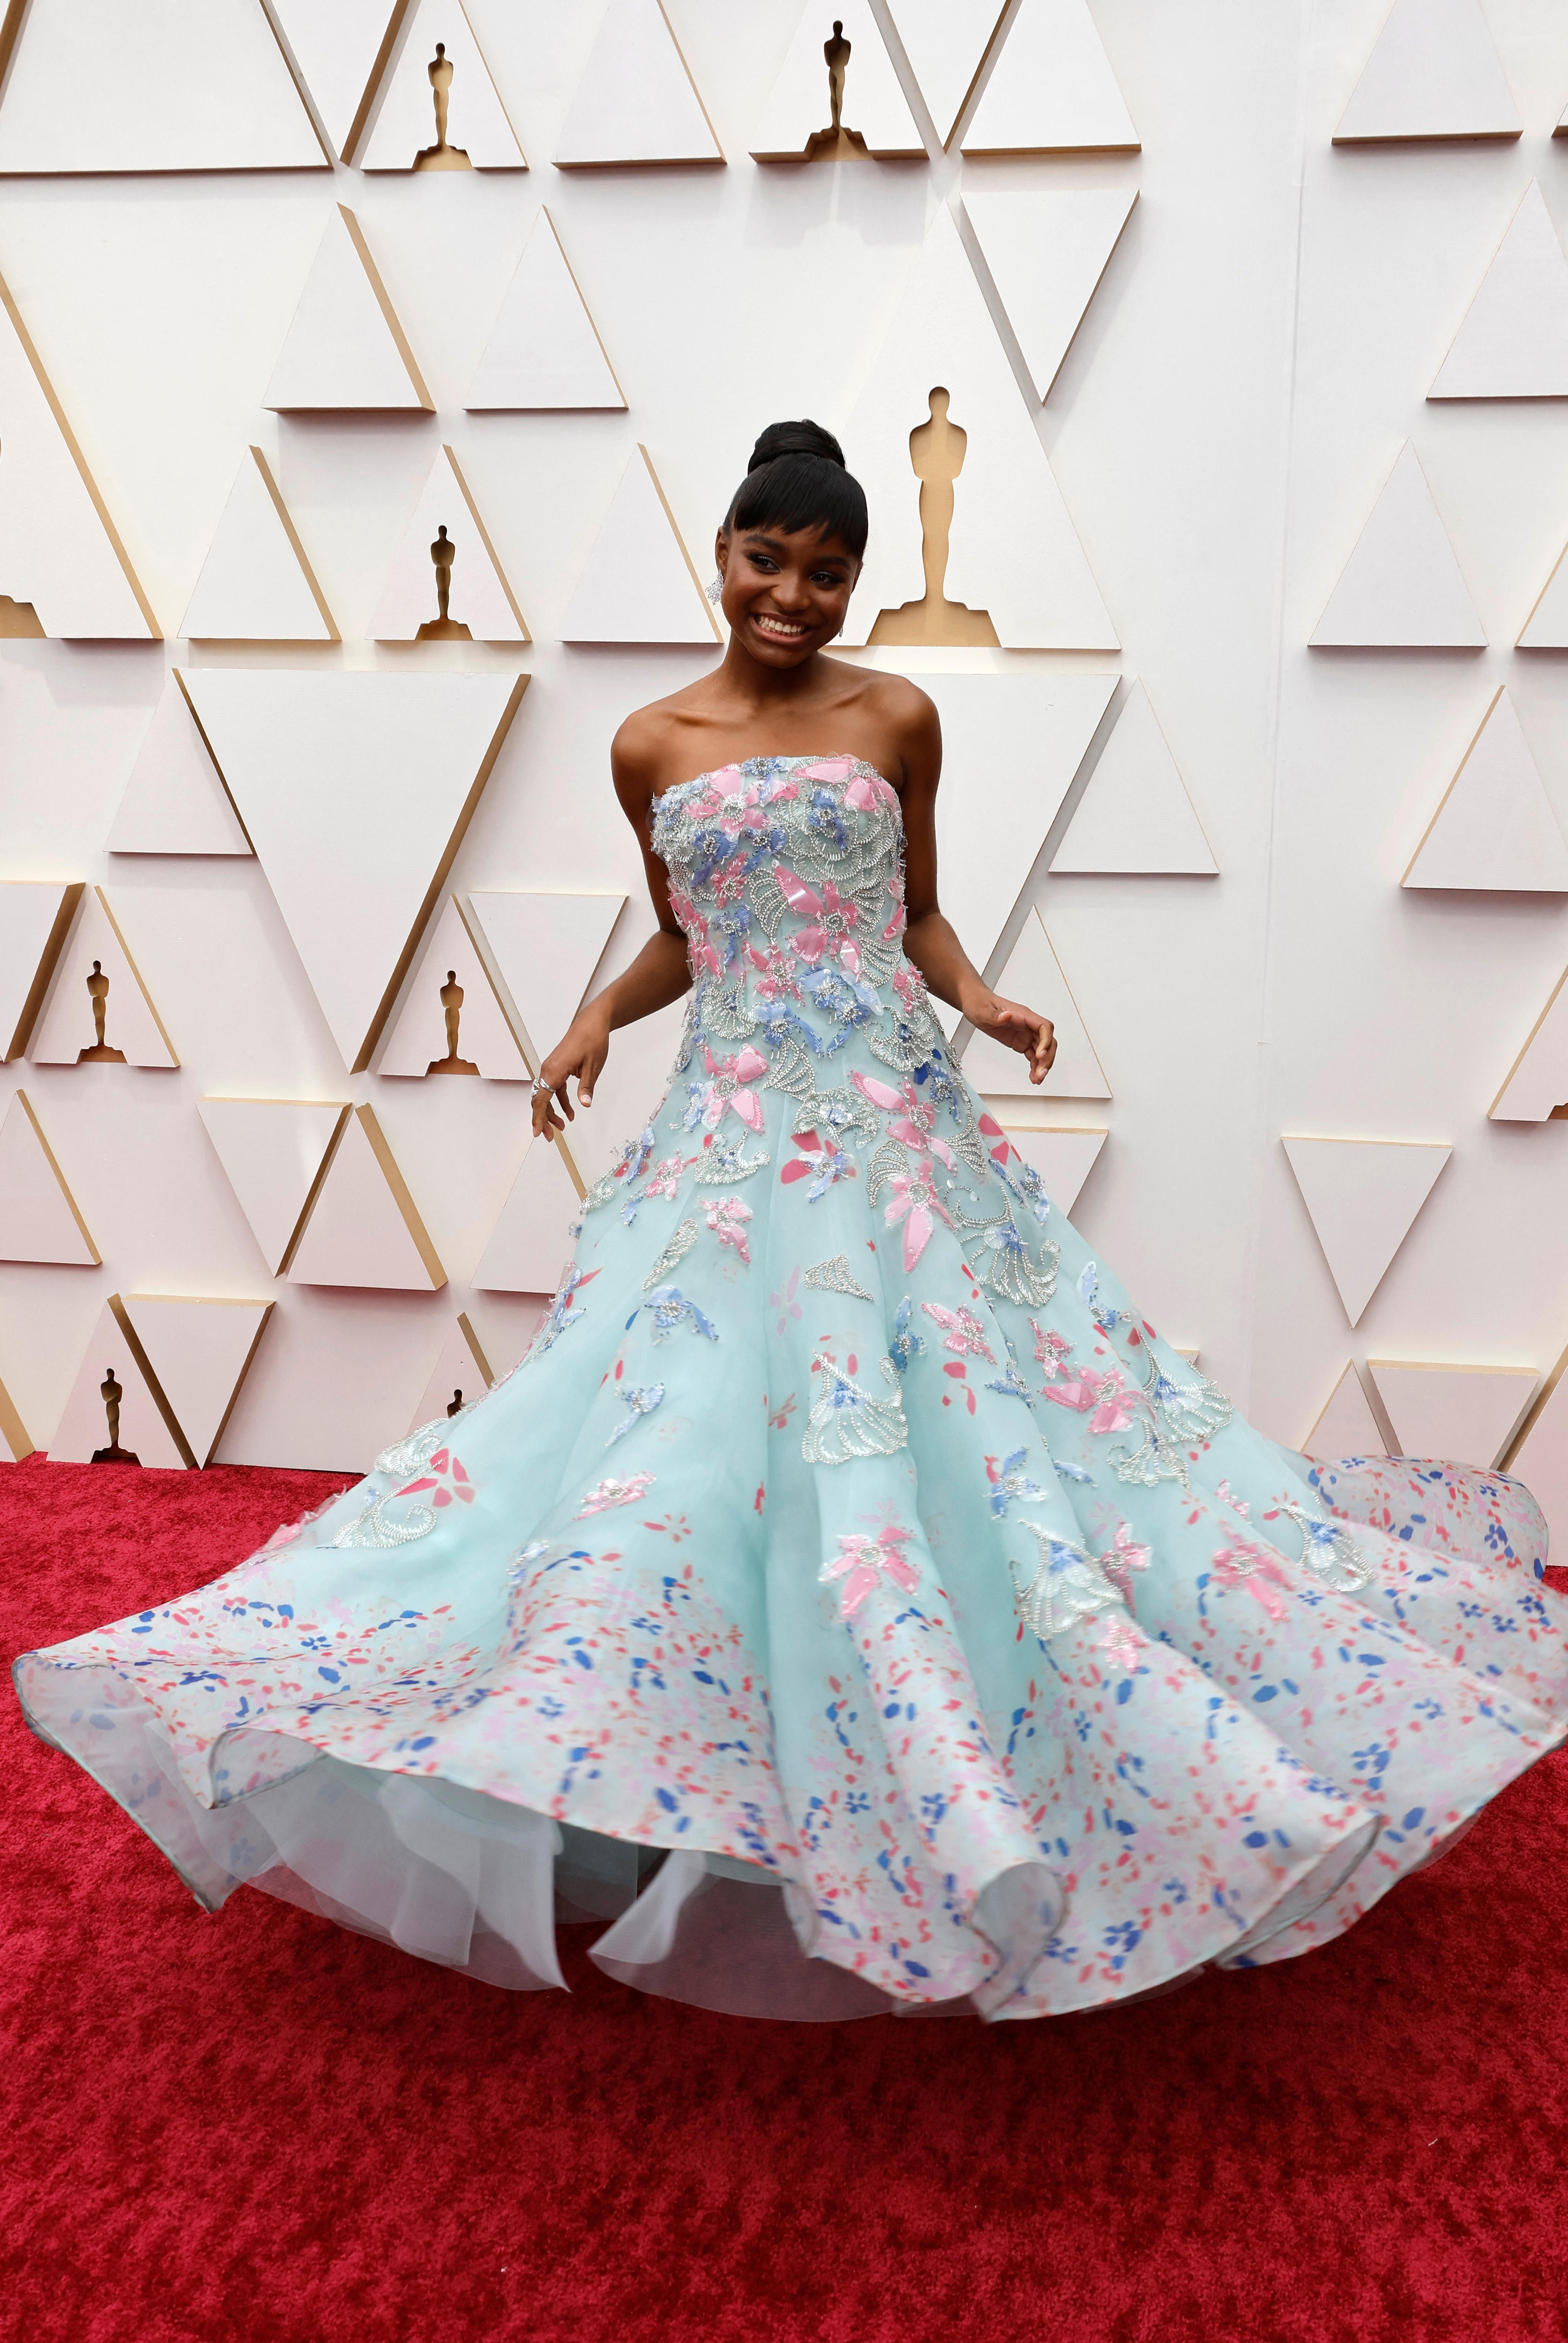 Saniyya Sidney swirls her blue ballgown with pink flowers on it on the red carpet at the oscars